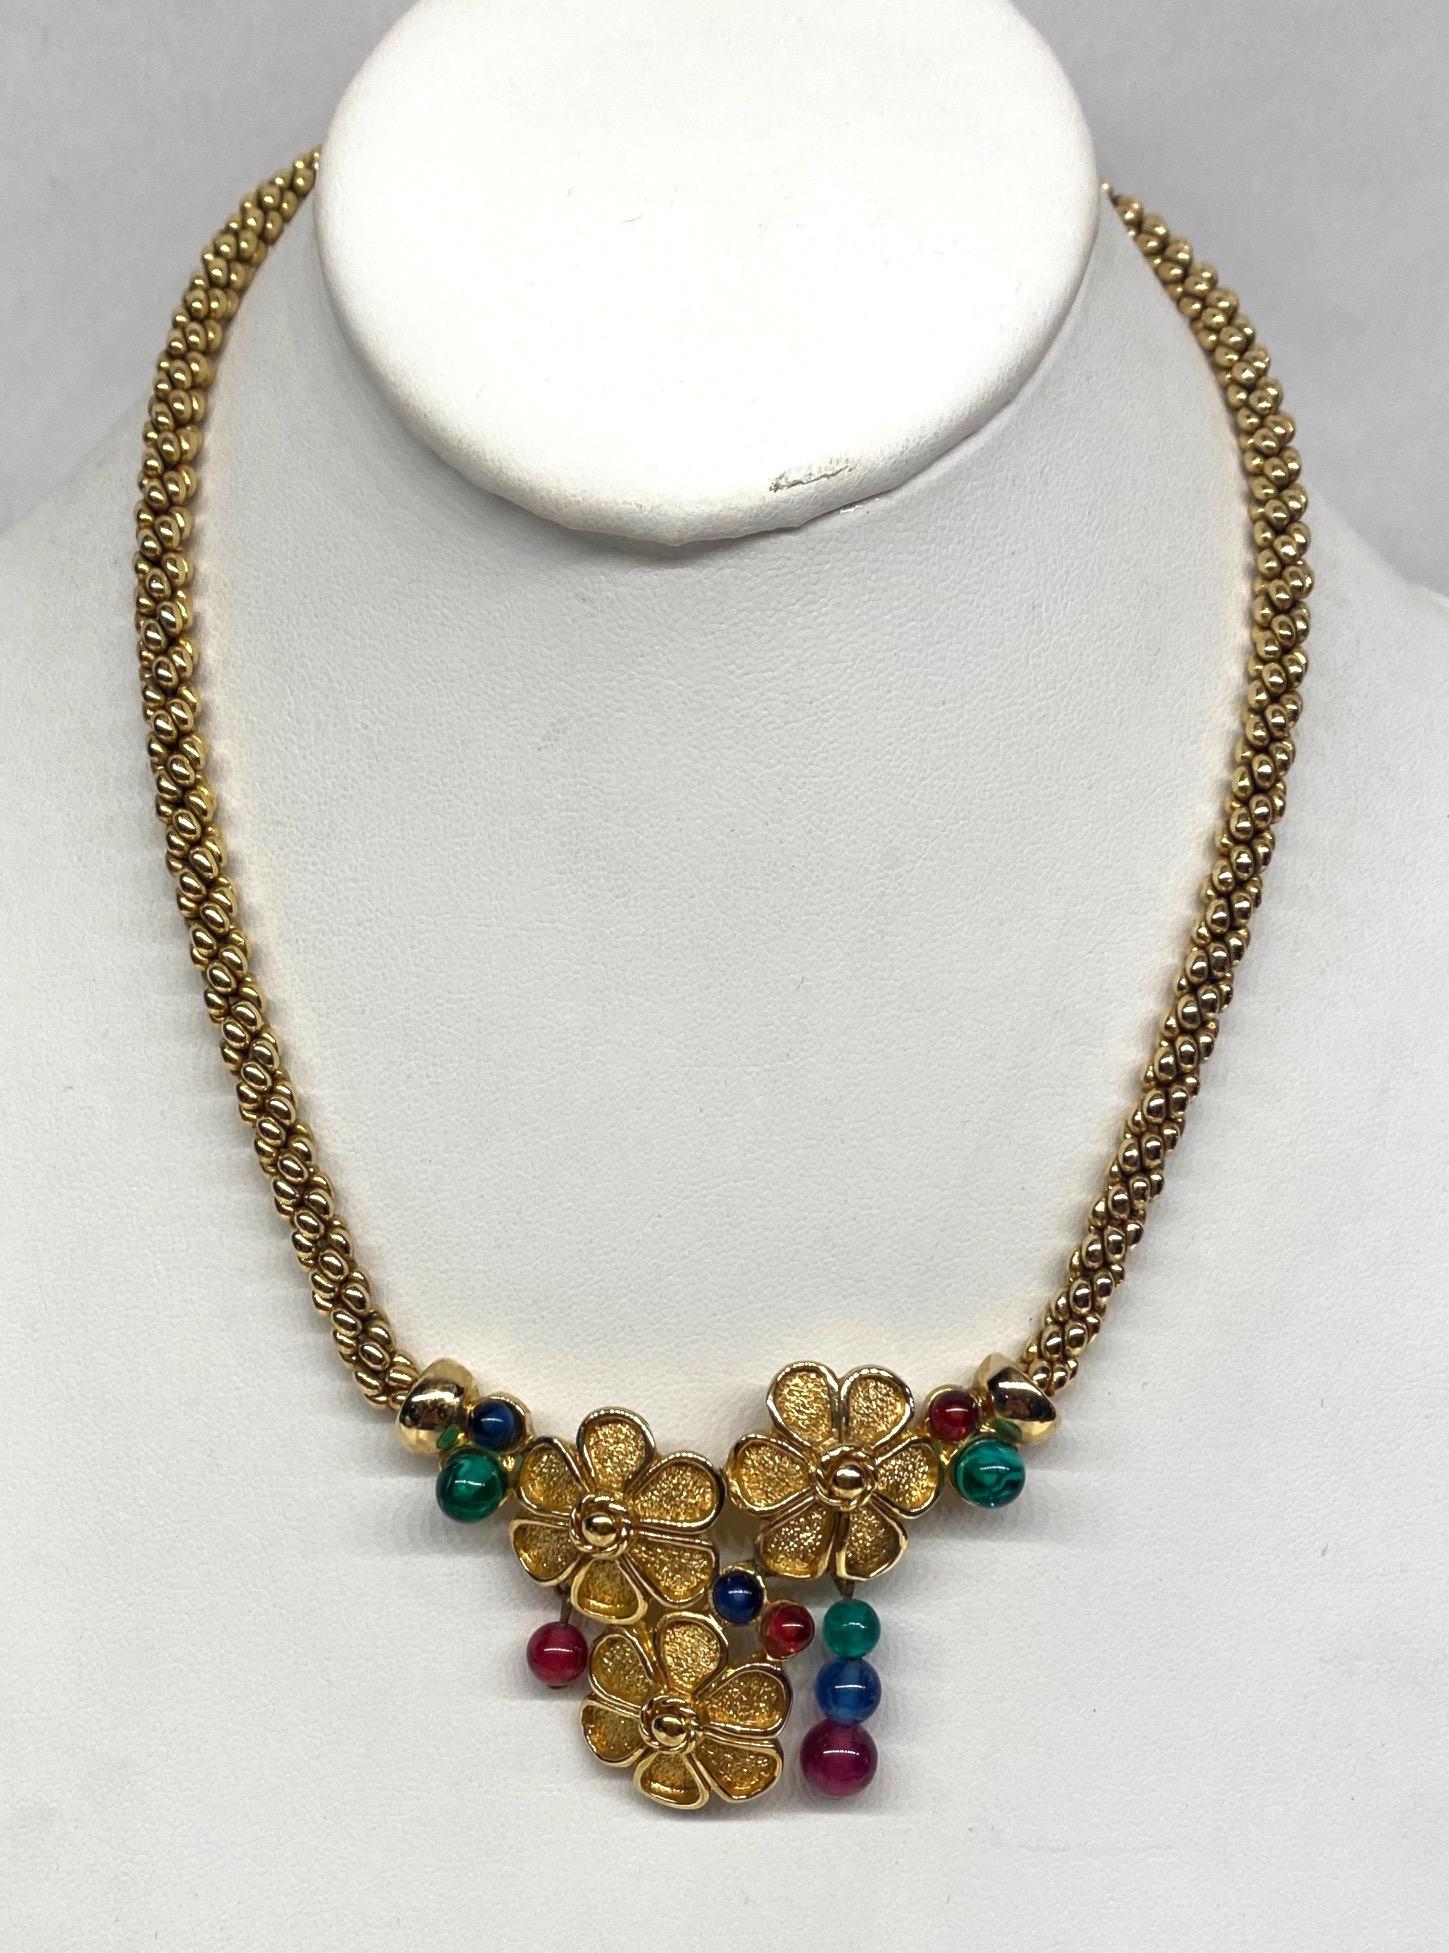 A charming and very wearable day to evening necklace by high end fashion jewelry company Grosse of Germany. Originally known as Henkel & Grosse and the manufacturer of jewelry for Christian Dior beginning in 1955 and continued for 50 years. Grosse